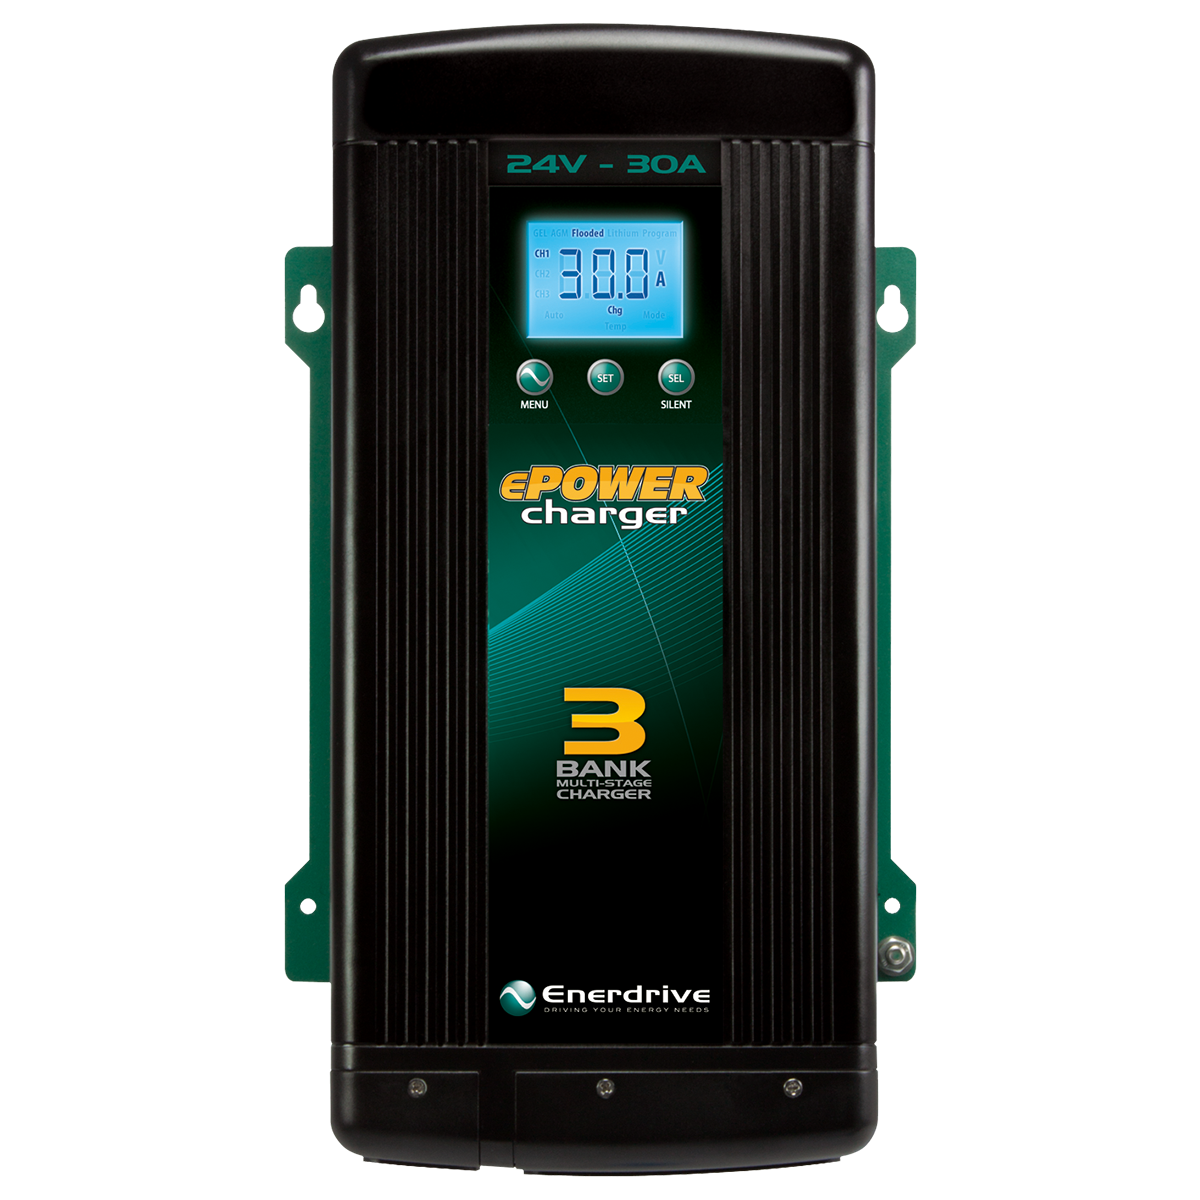 ENERDRIVE EPOWER 24V 30A BATTERY CHARGER AC TO DC